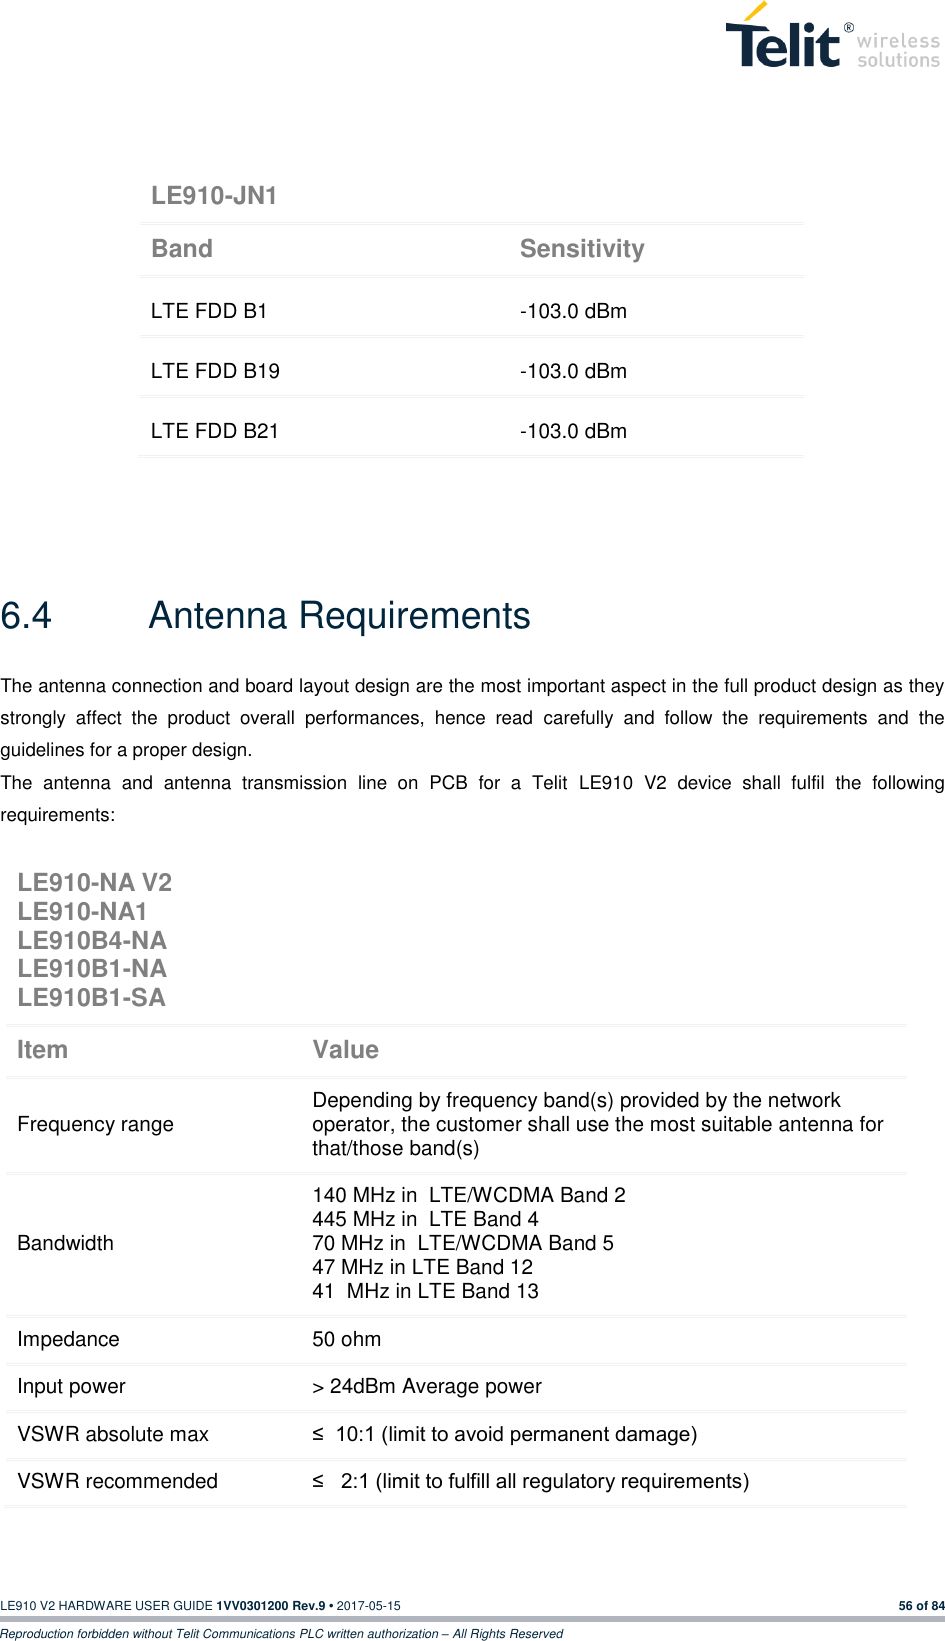   LE910 V2 HARDWARE USER GUIDE 1VV0301200 Rev.9 • 2017-05-15 56 of 84 Reproduction forbidden without Telit Communications PLC written authorization – All Rights Reserved           6.4  Antenna Requirements The antenna connection and board layout design are the most important aspect in the full product design as they strongly  affect  the  product  overall  performances,  hence  read  carefully  and  follow  the  requirements  and  the guidelines for a proper design. The  antenna  and  antenna  transmission  line  on  PCB  for  a  Telit  LE910  V2  device  shall  fulfil  the  following requirements:  LE910-JN1 Band Sensitivity LTE FDD B1 -103.0 dBm LTE FDD B19 -103.0 dBm LTE FDD B21 -103.0 dBm LE910-NA V2 LE910-NA1 LE910B4-NA LE910B1-NA LE910B1-SA  Item Value Frequency range Depending by frequency band(s) provided by the network operator, the customer shall use the most suitable antenna for that/those band(s) Bandwidth 140 MHz in  LTE/WCDMA Band 2 445 MHz in  LTE Band 4 70 MHz in  LTE/WCDMA Band 5 47 MHz in LTE Band 12 41  MHz in LTE Band 13 Impedance 50 ohm Input power &gt; 24dBm Average power VSWR absolute max ≤  10:1 (limit to avoid permanent damage) VSWR recommended ≤   2:1 (limit to fulfill all regulatory requirements) 